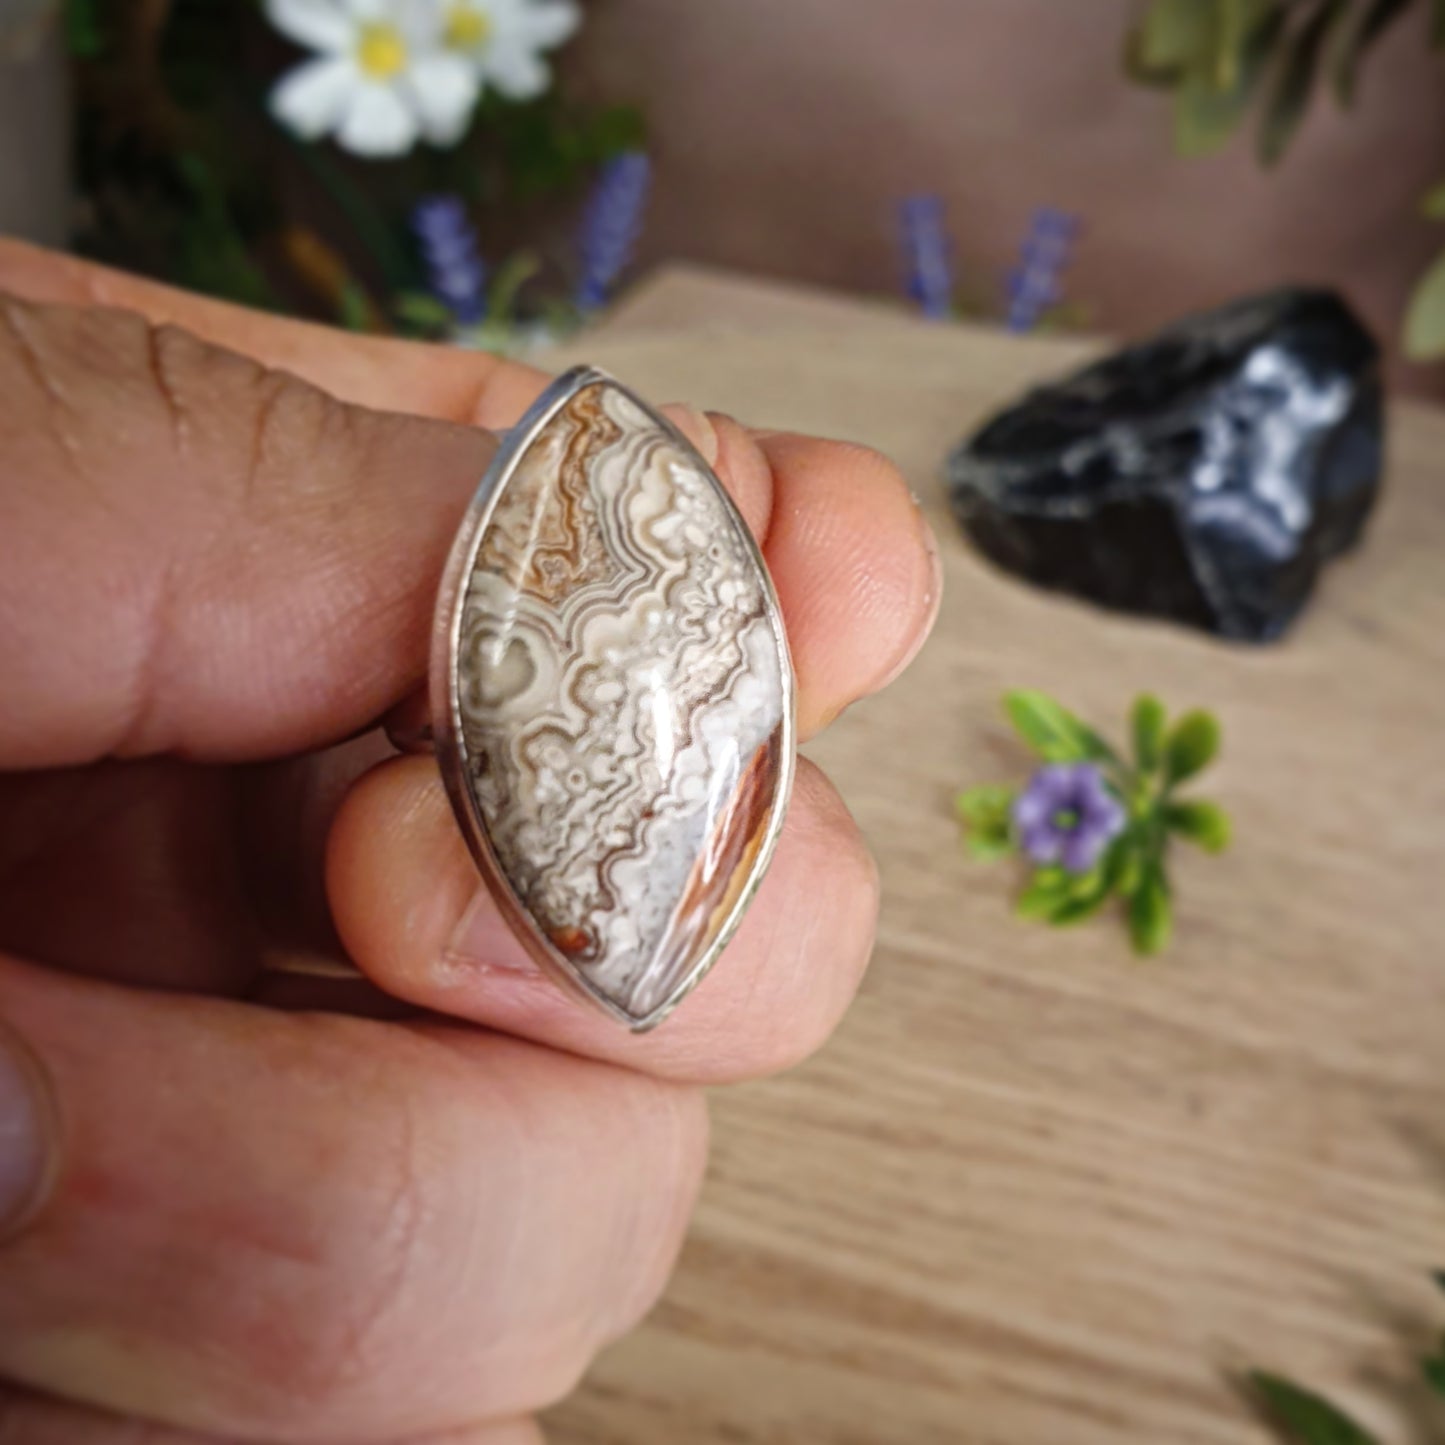 Lace Agate Ring - Size 7 - ON SALE